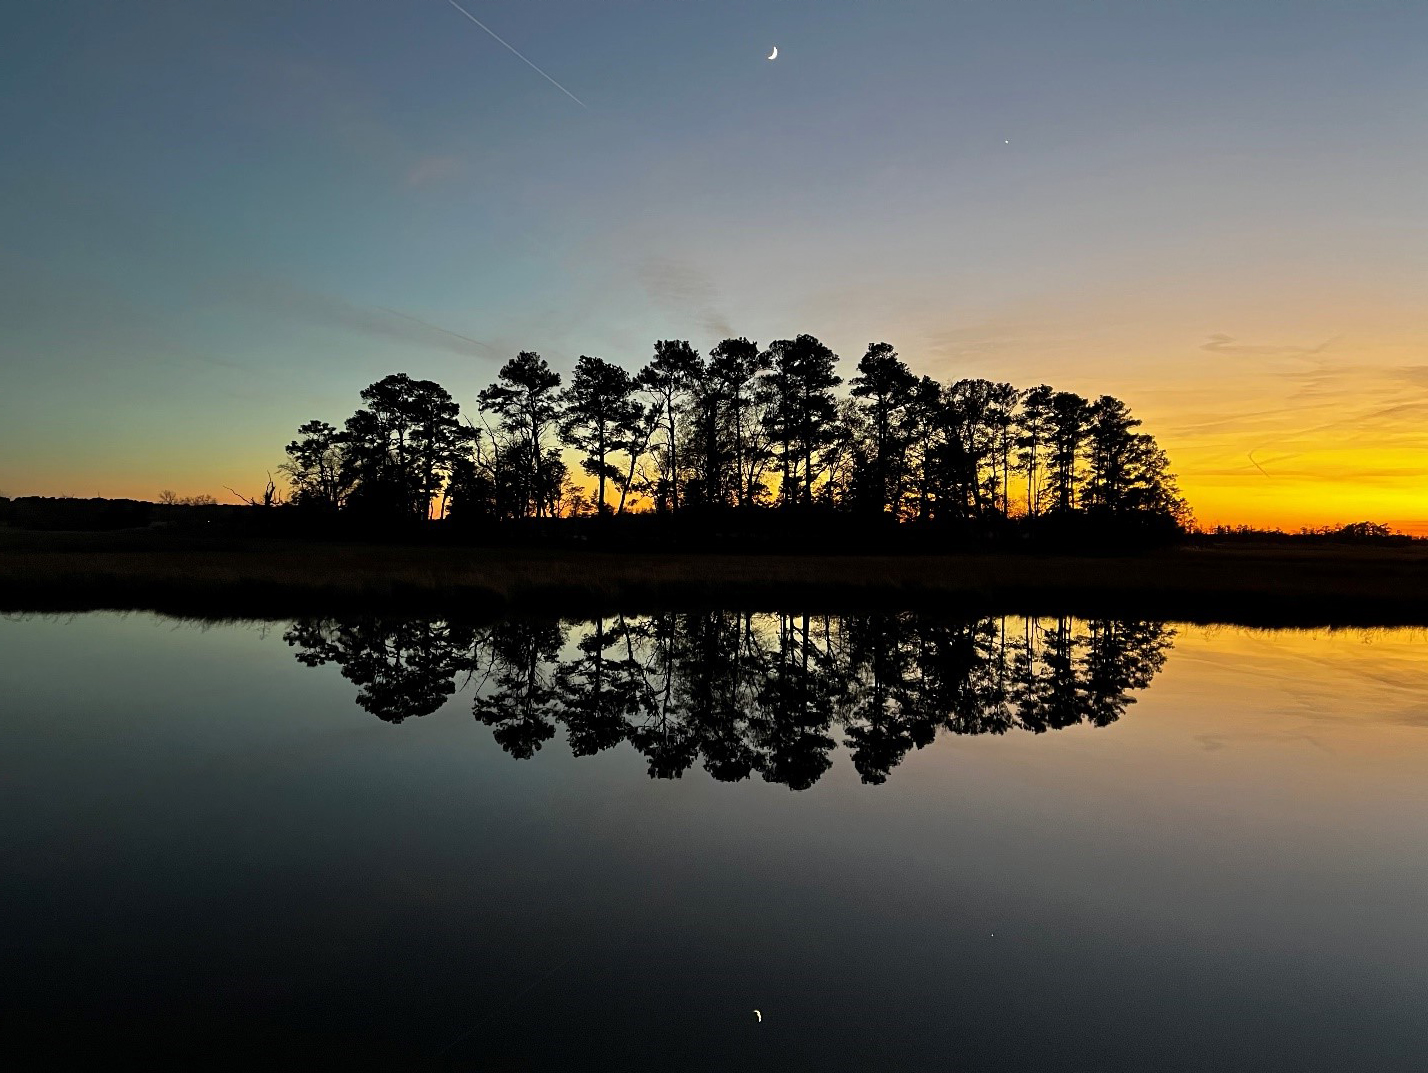 A cluster of trees and a line of marsh grass reflect in glassy water at sunset.